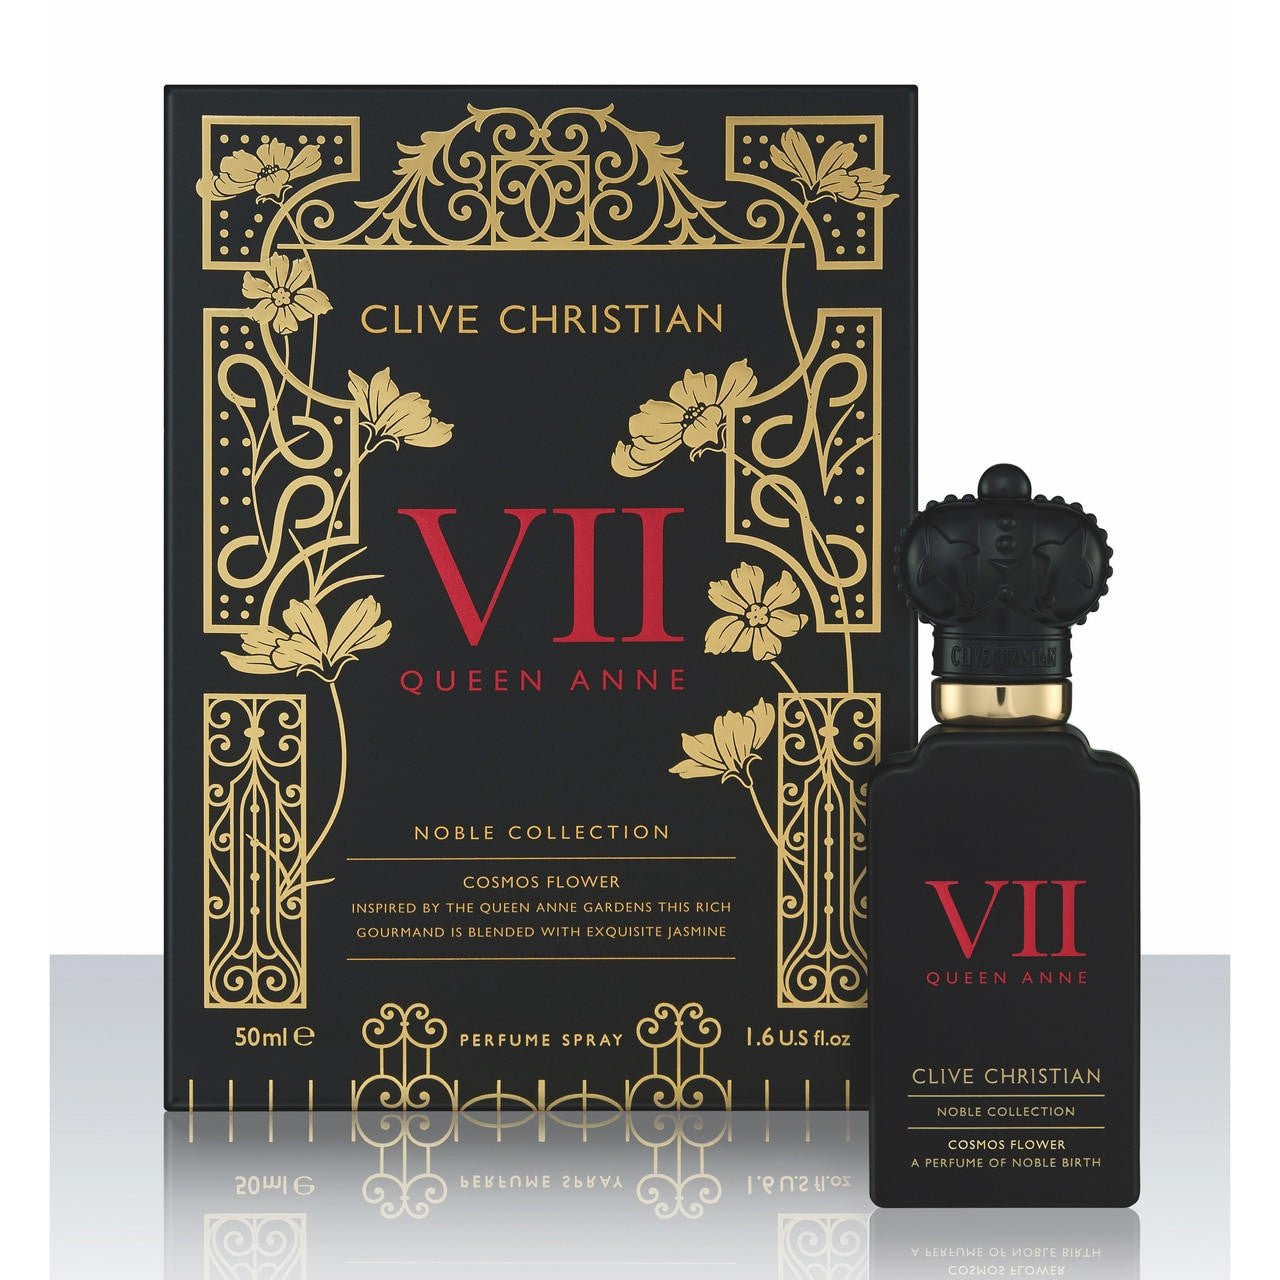 Clive Christian Noble Vii Collection Cosmos Flower Perfume | My Perfume Shop Australia